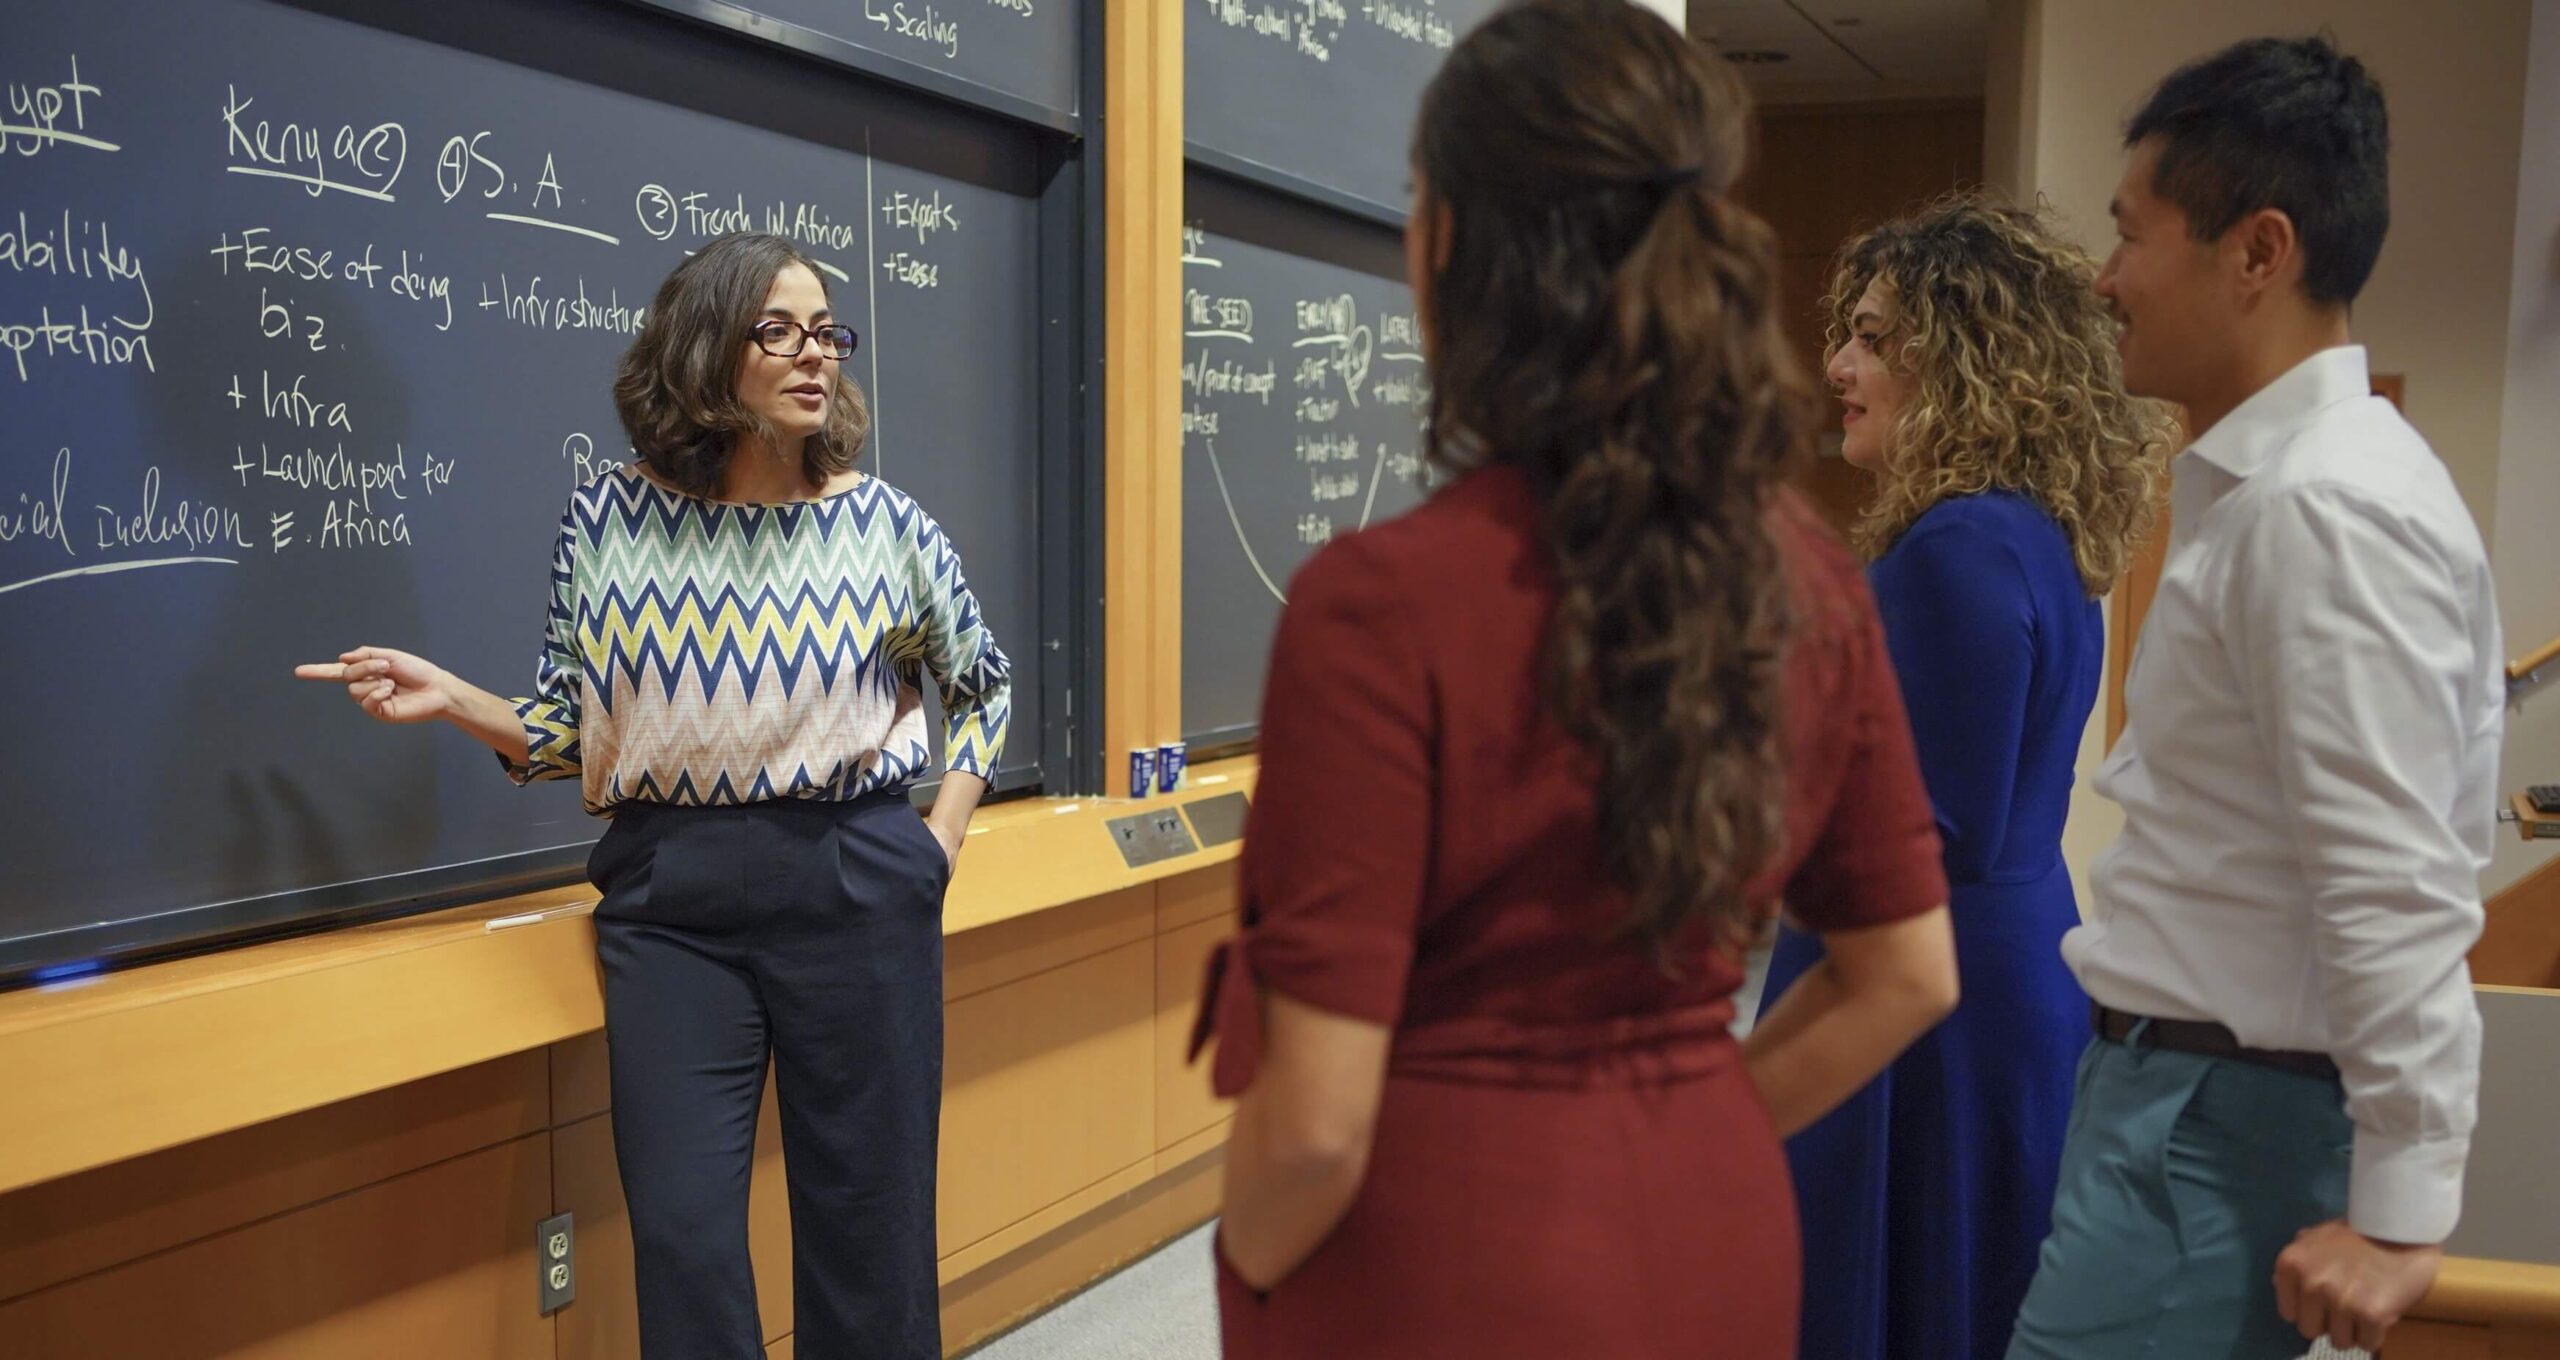 Paula stands in front of a blackboard, engaged in a discussion with three others